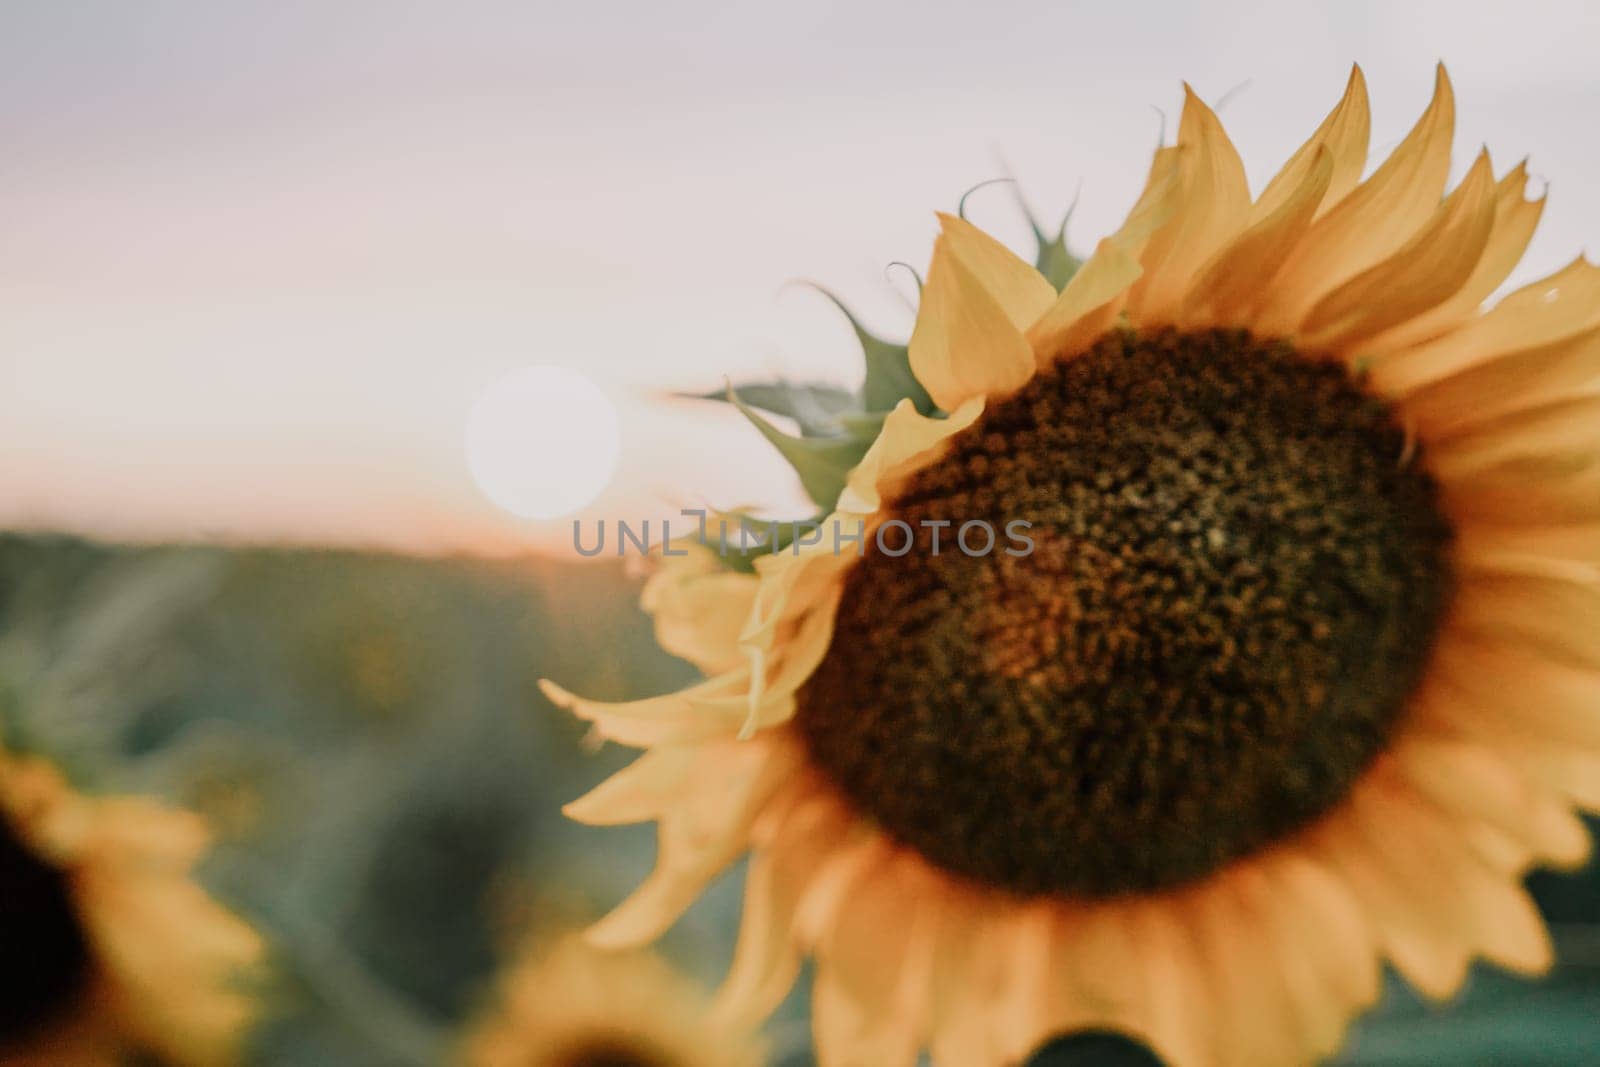 Bright Sunflower Flower: Close-up of a sunflower in full bloom, creating a natural abstract background. Summer time. Field of sunflowers in the warm light of the setting sun. Helianthus annuus. by panophotograph